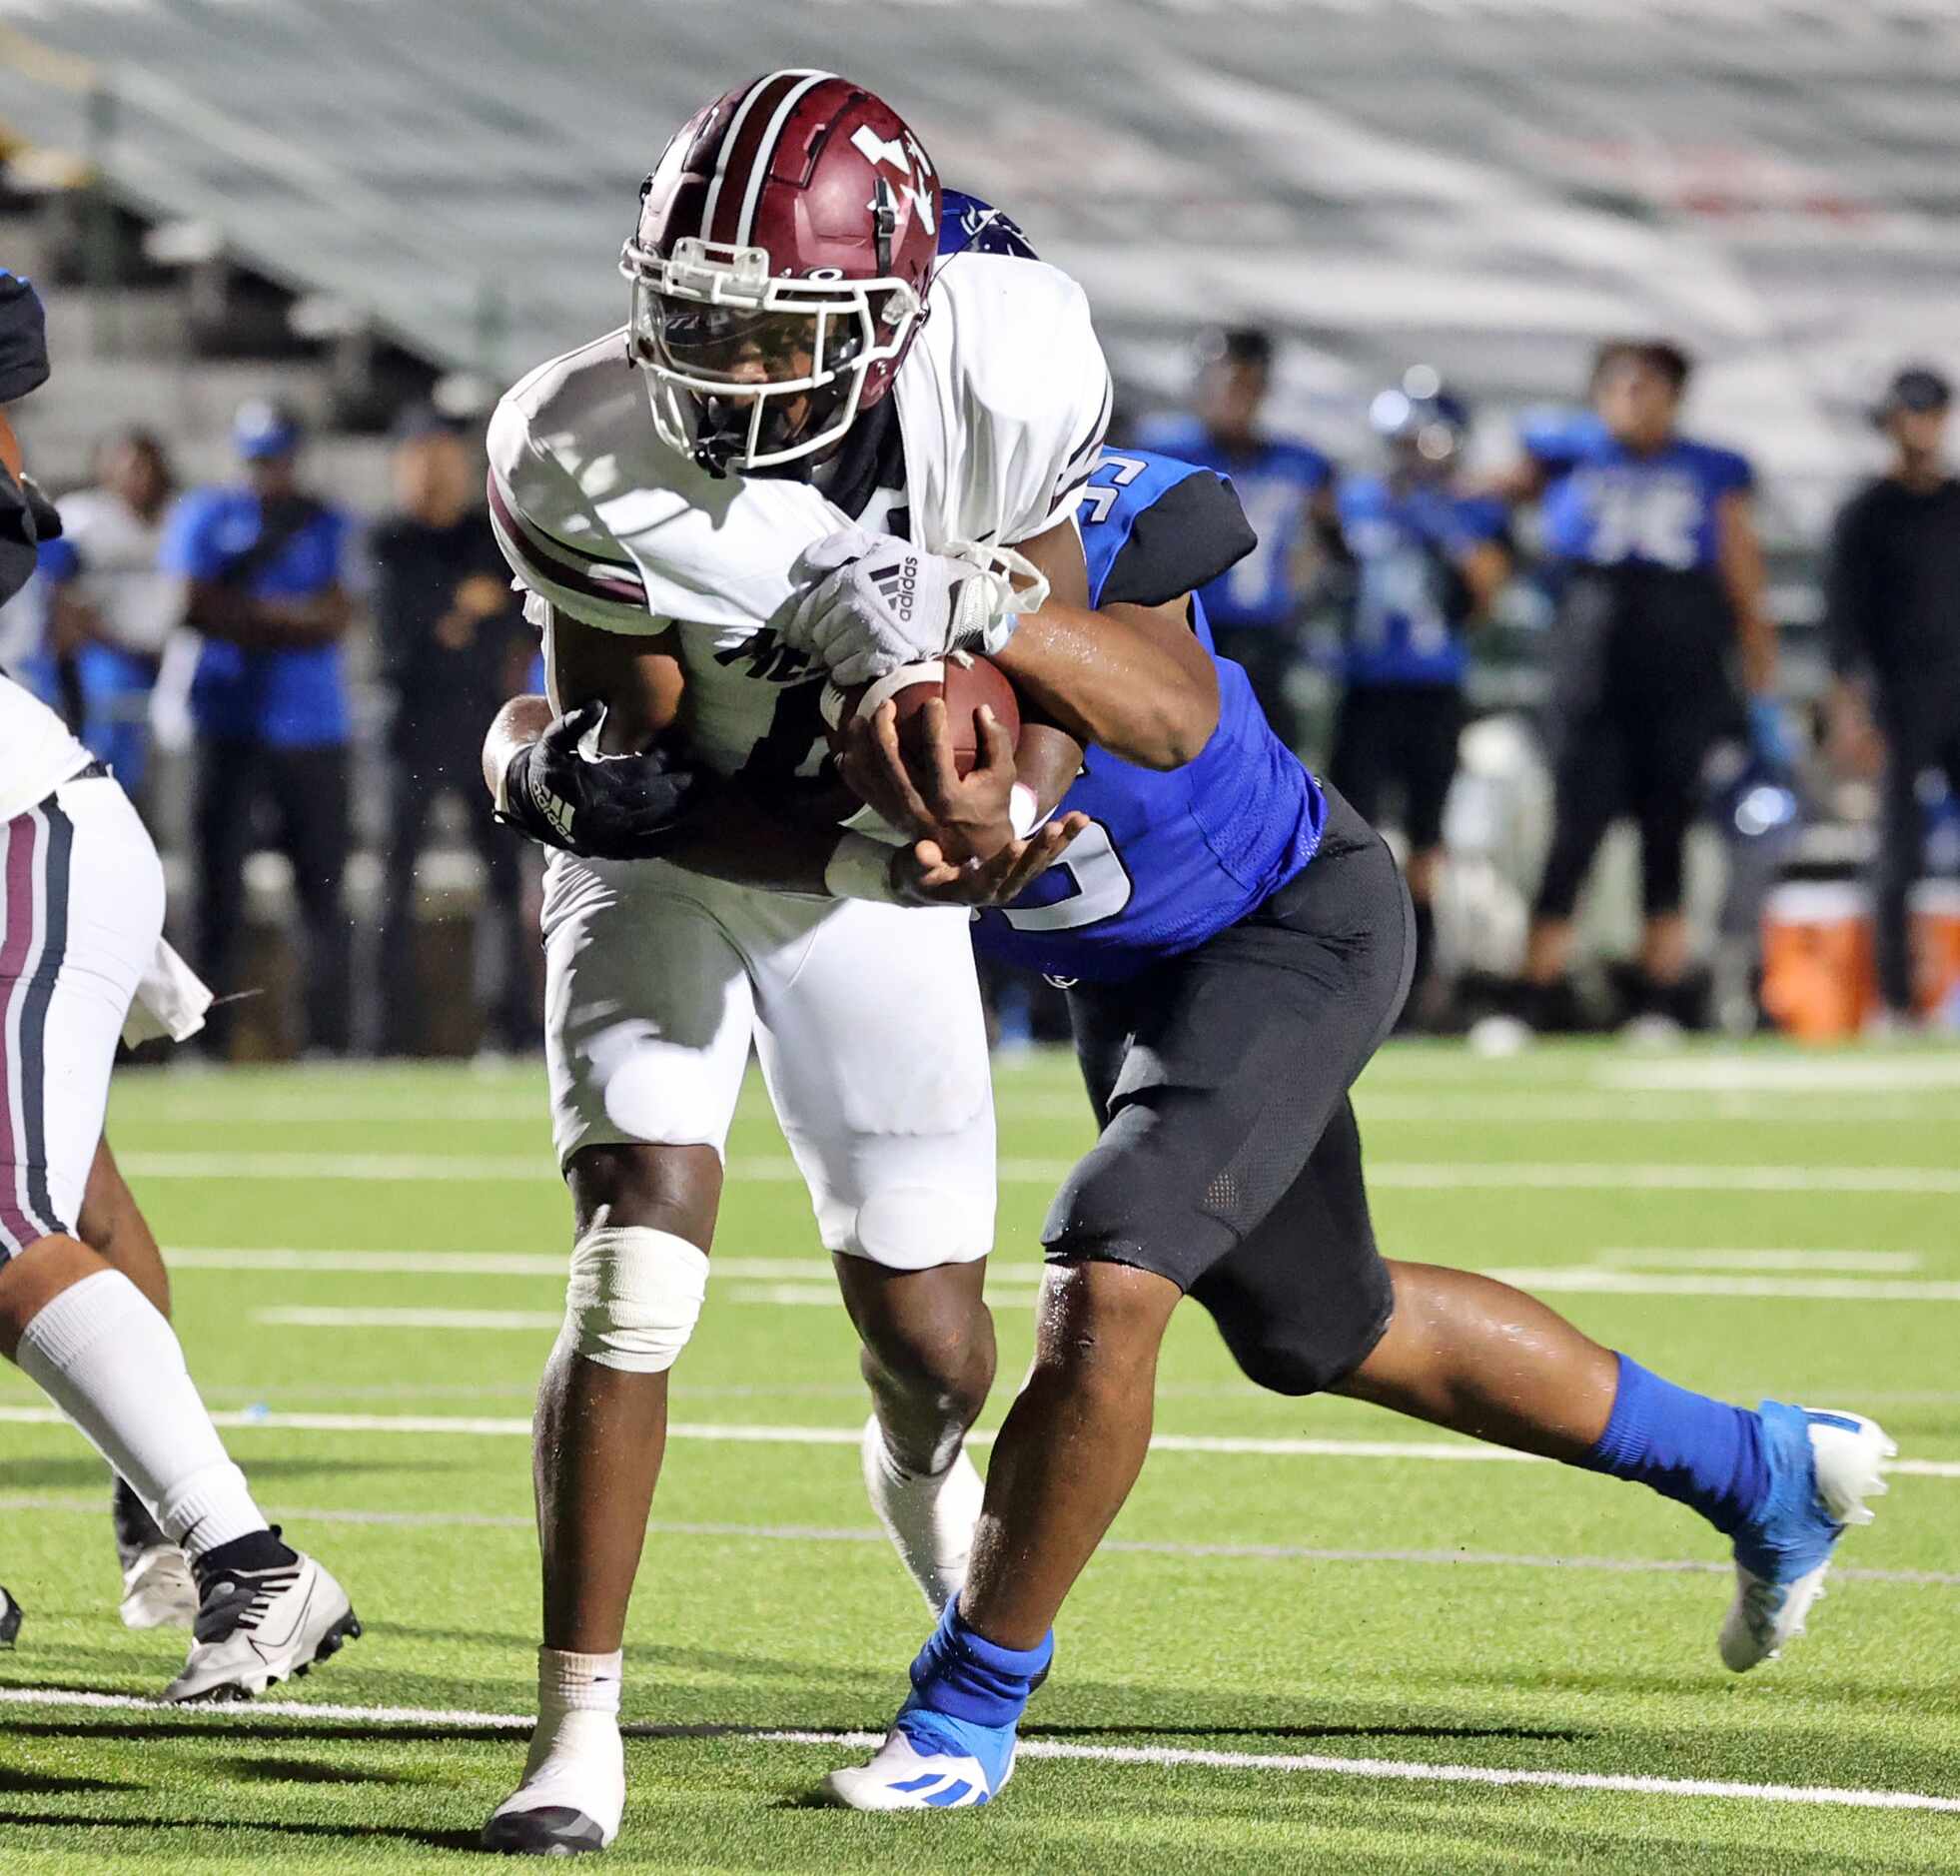 Mesquite High’s Armand Cleaver (6) breaks away from a North Mesquite defender and scores a...